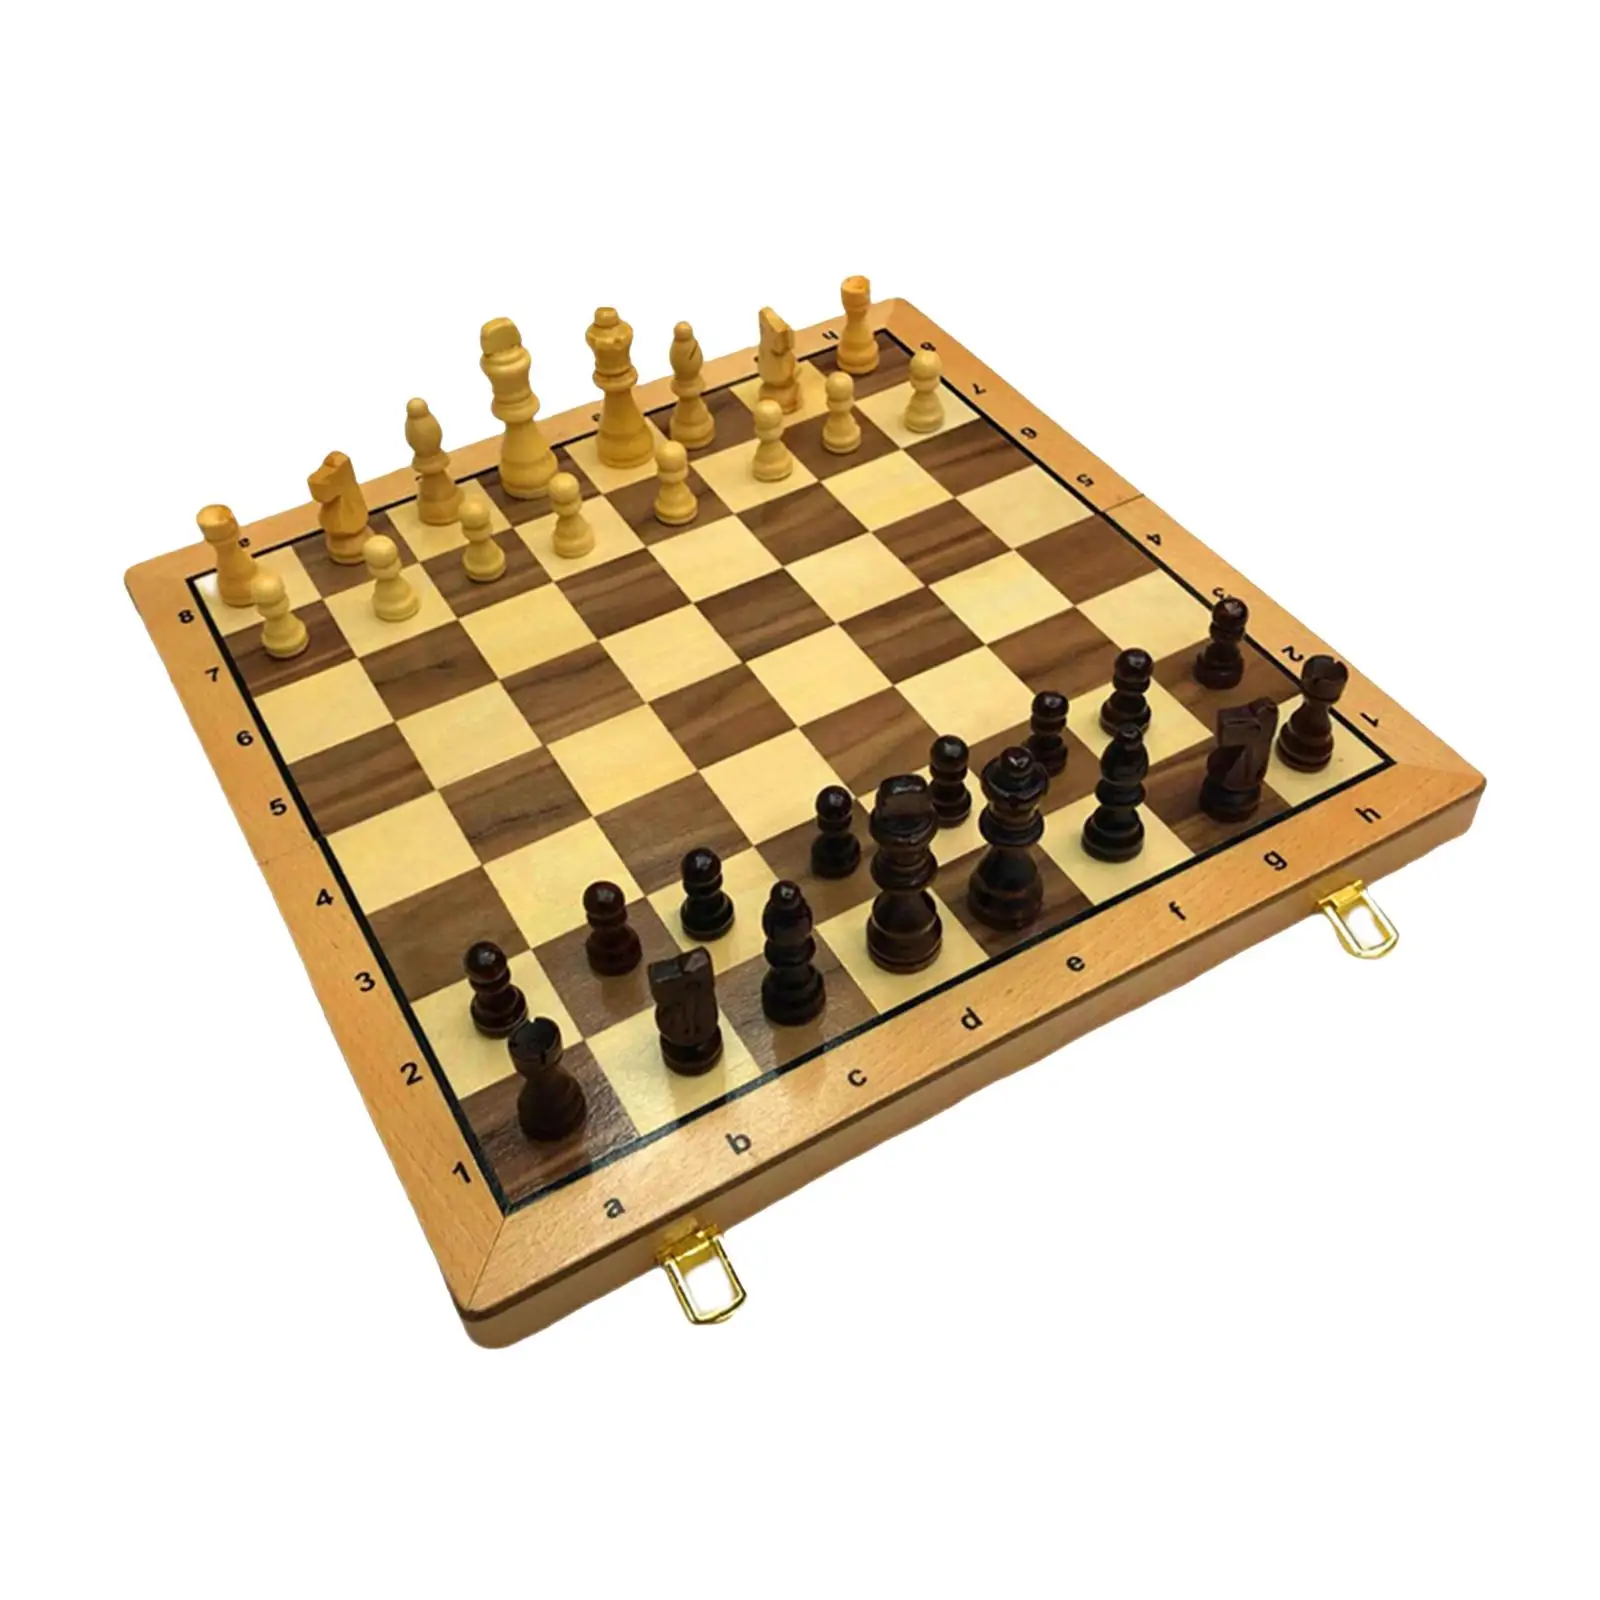 15 Inches Wooden Chess Set - Folding Board, Handmade Portable Travel Chess Board  with Game Pieces  Beginner Chess Set for Kids